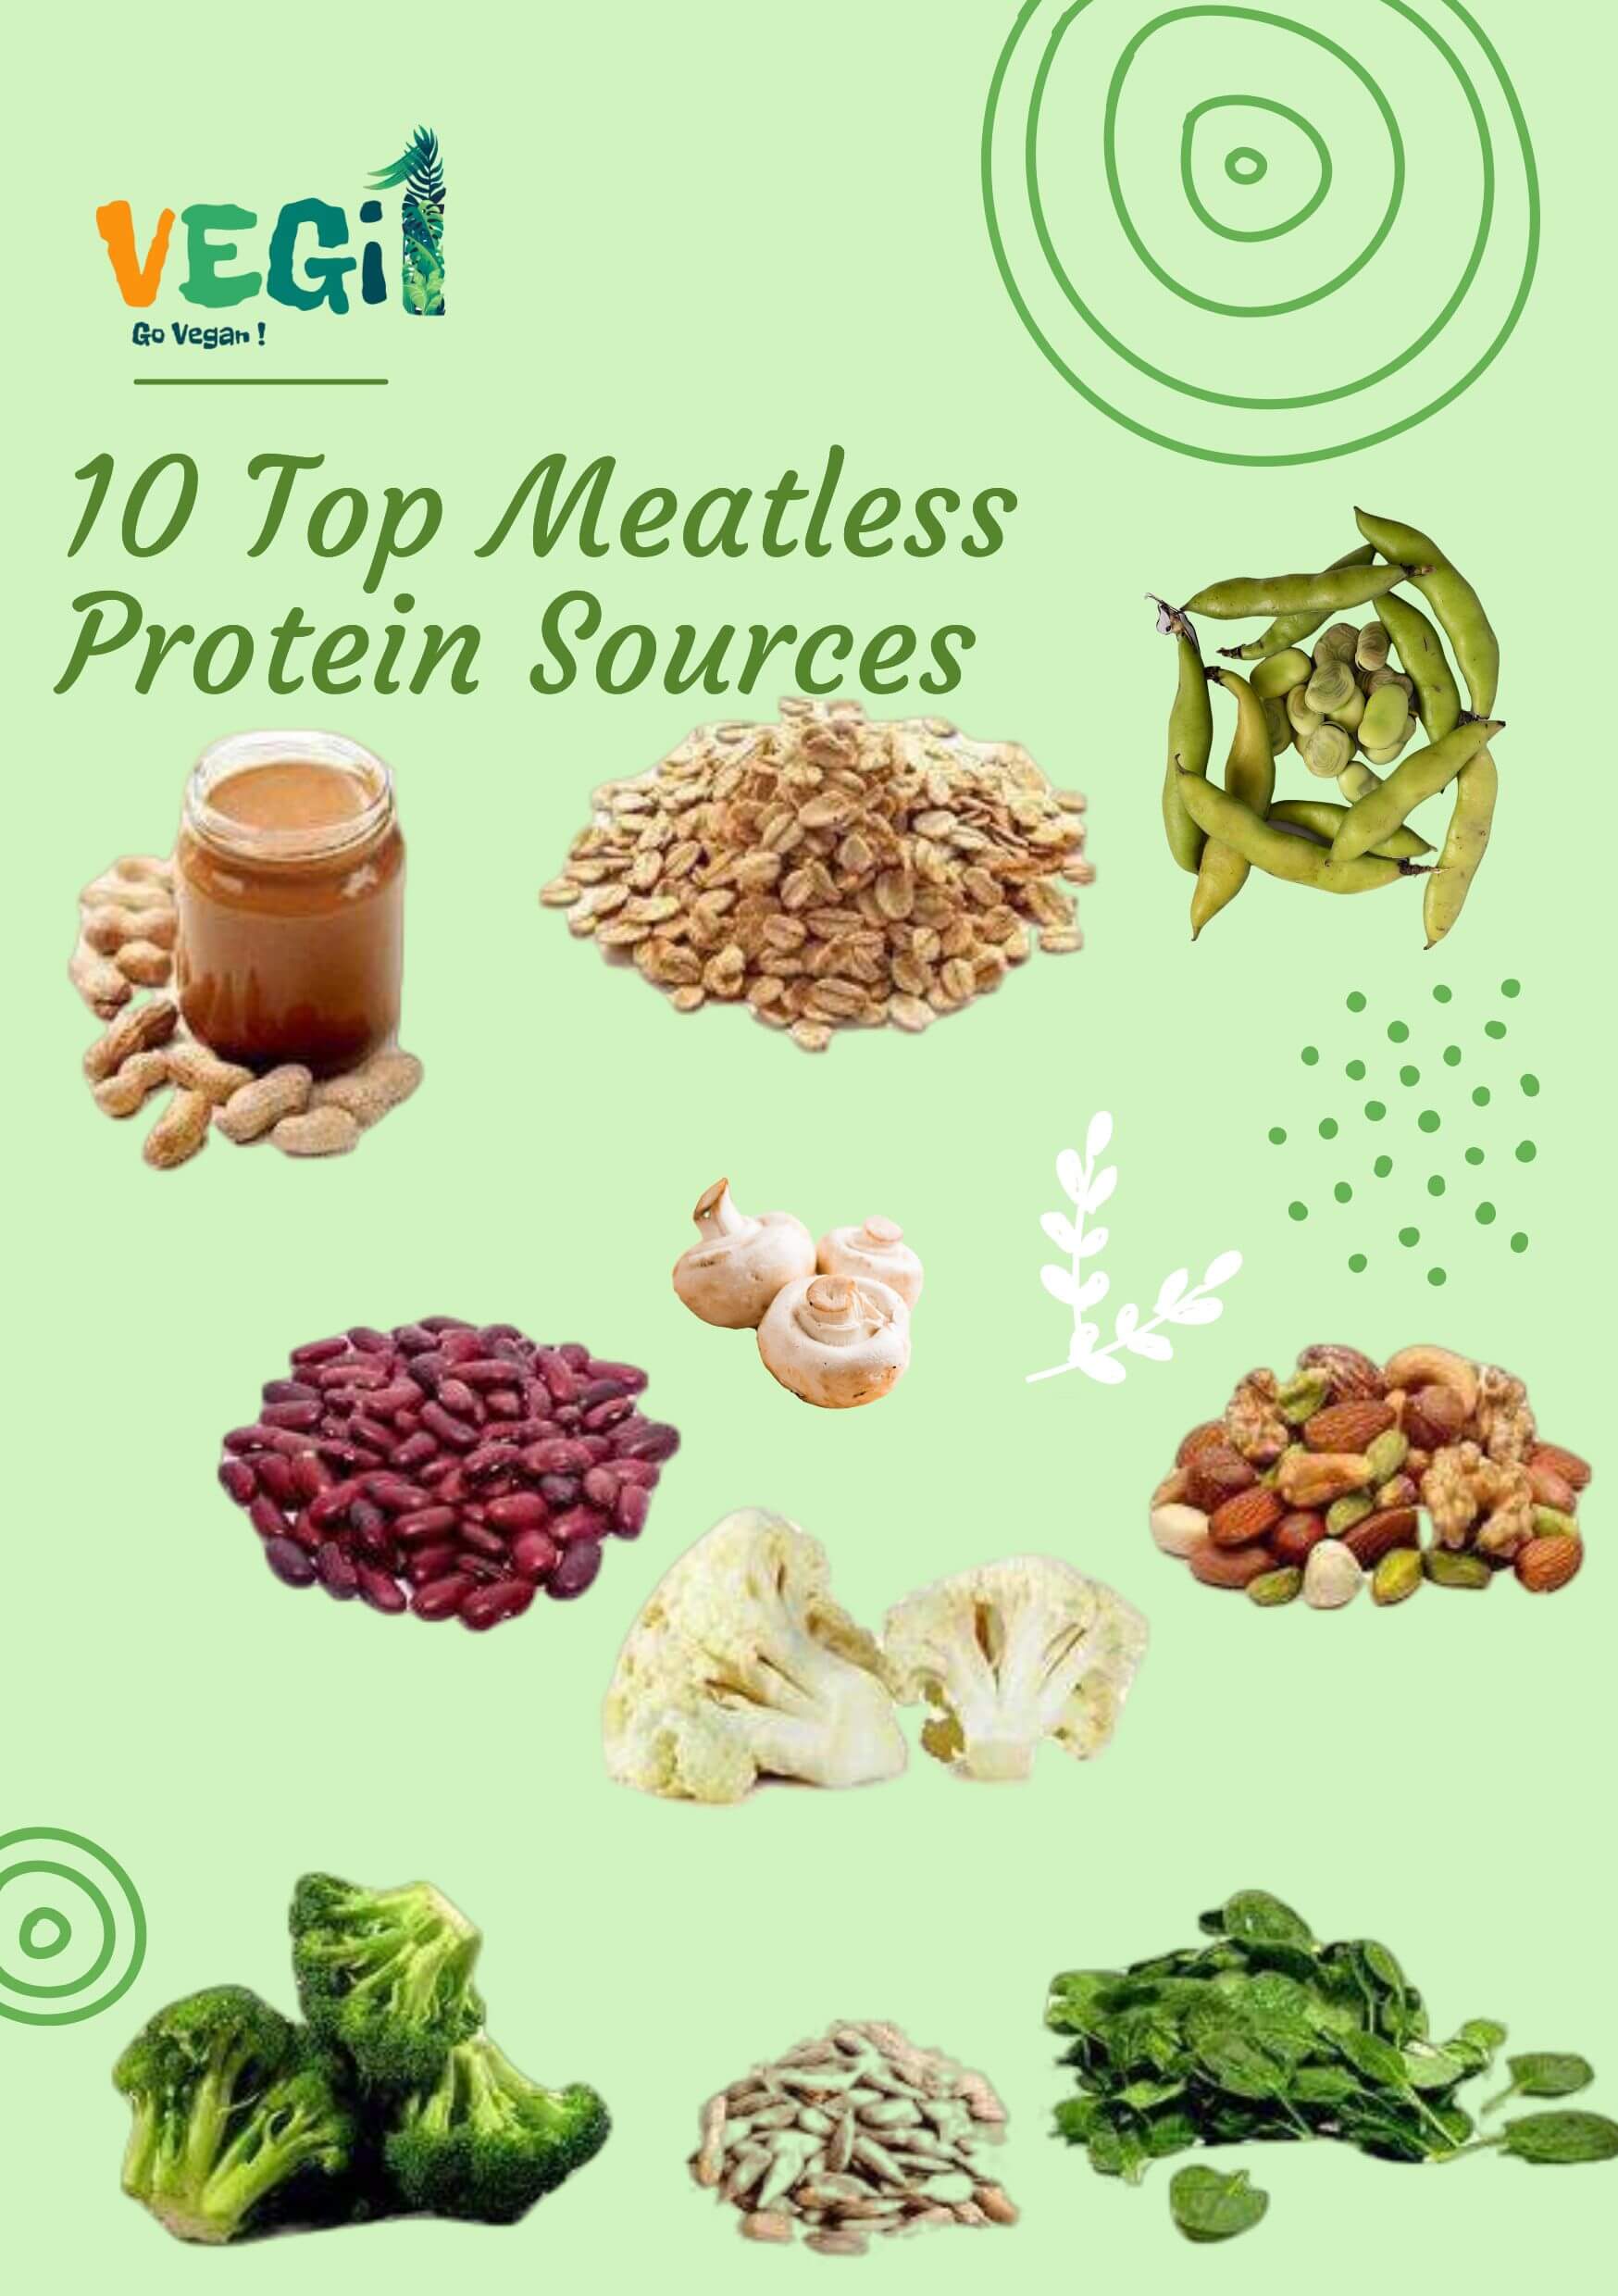 10 Top Meatless Protein Sources